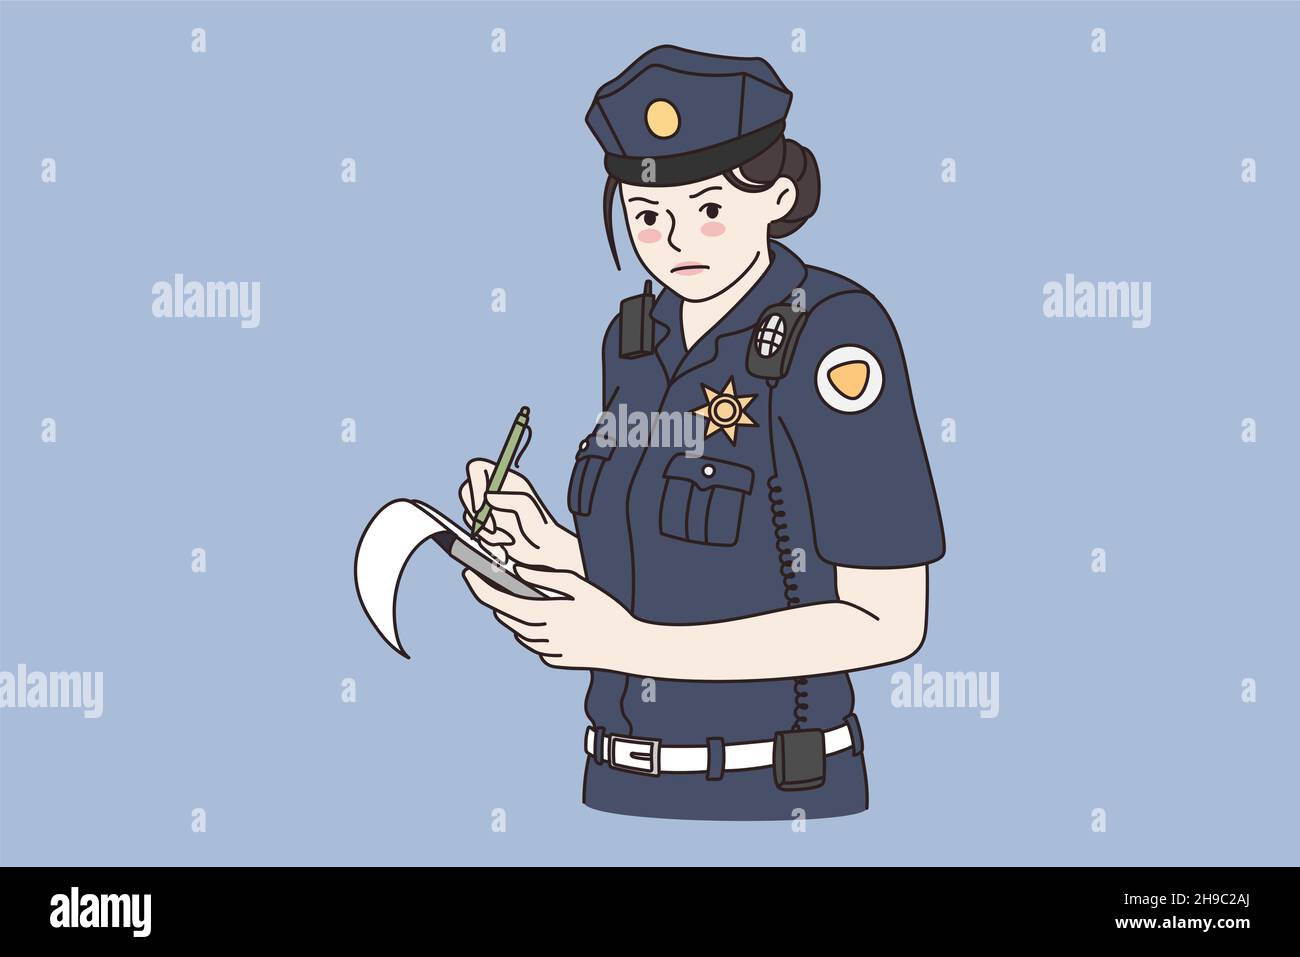 Working as policewoman and detective concept. Young serious woman wearing uniform and hat standing and making notes for work during investigation vector illustration  Stock Vector